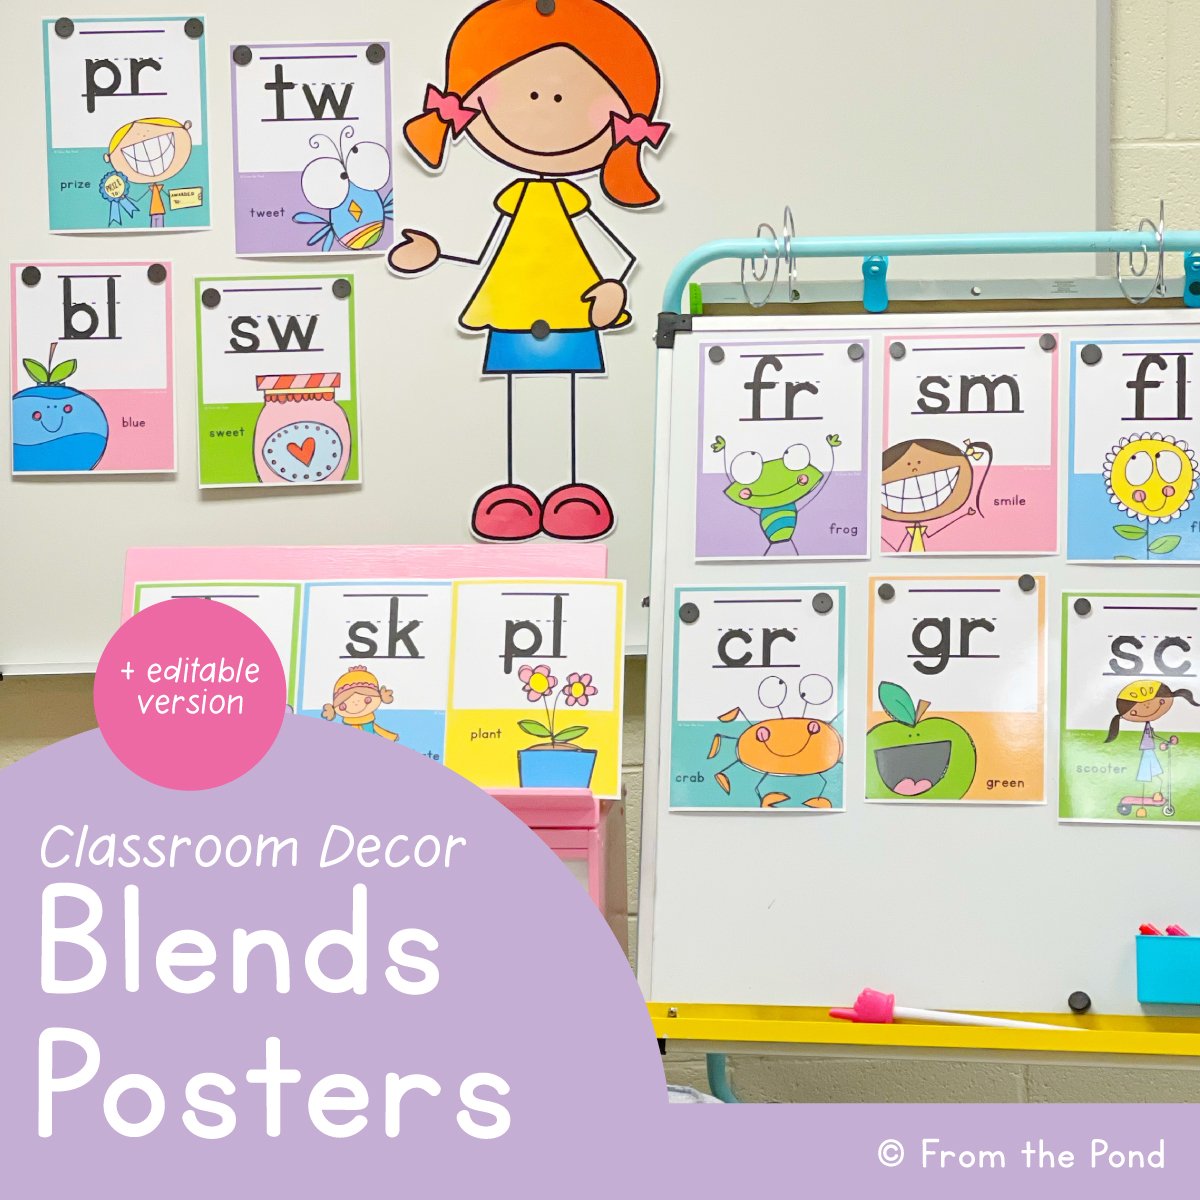 Printable classroom decor and decorations for happy, child focused ...